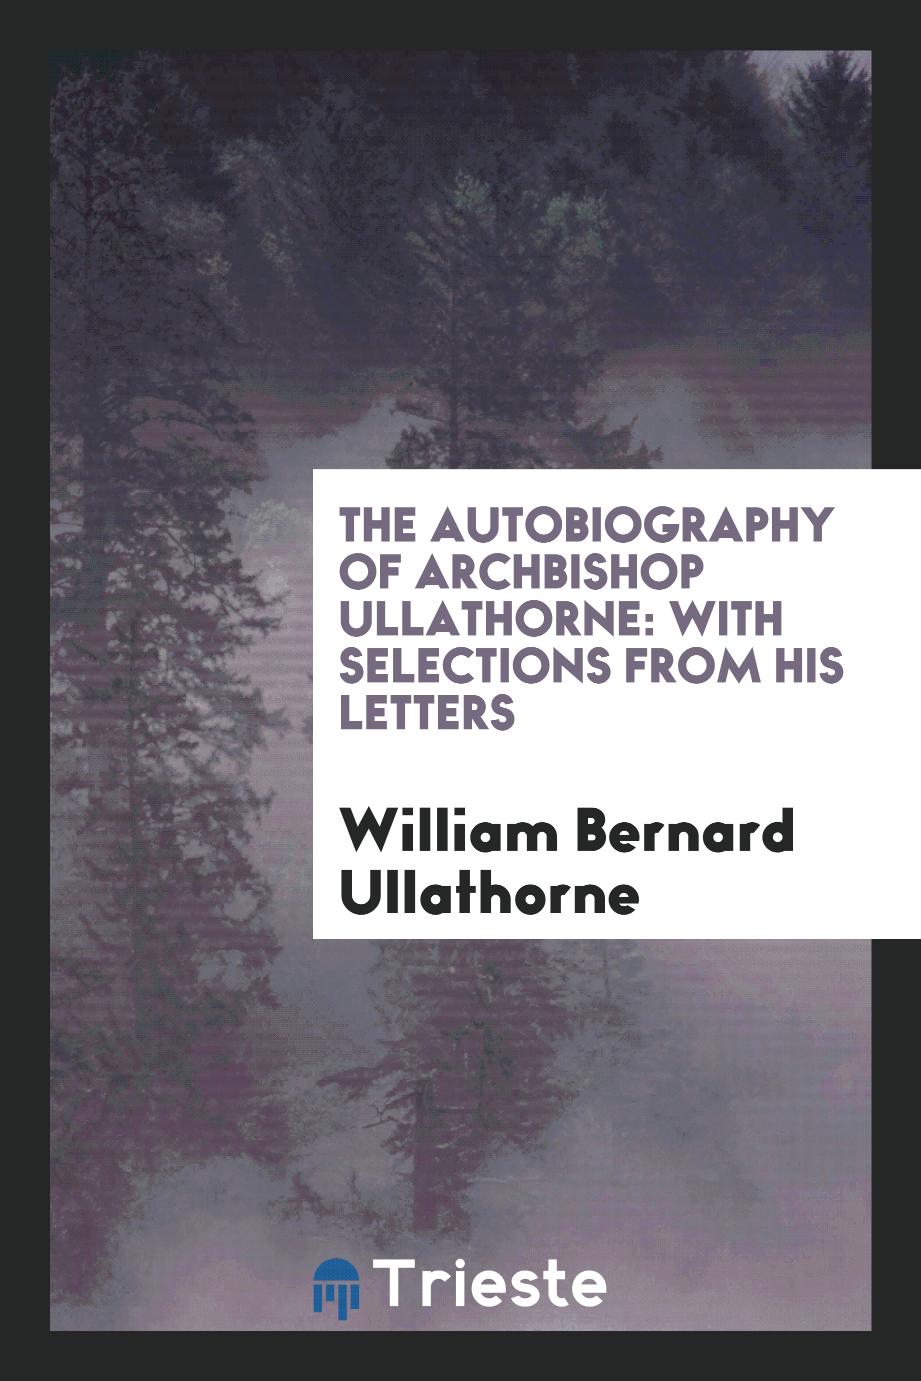 The autobiography of Archbishop Ullathorne: with selections from his letters